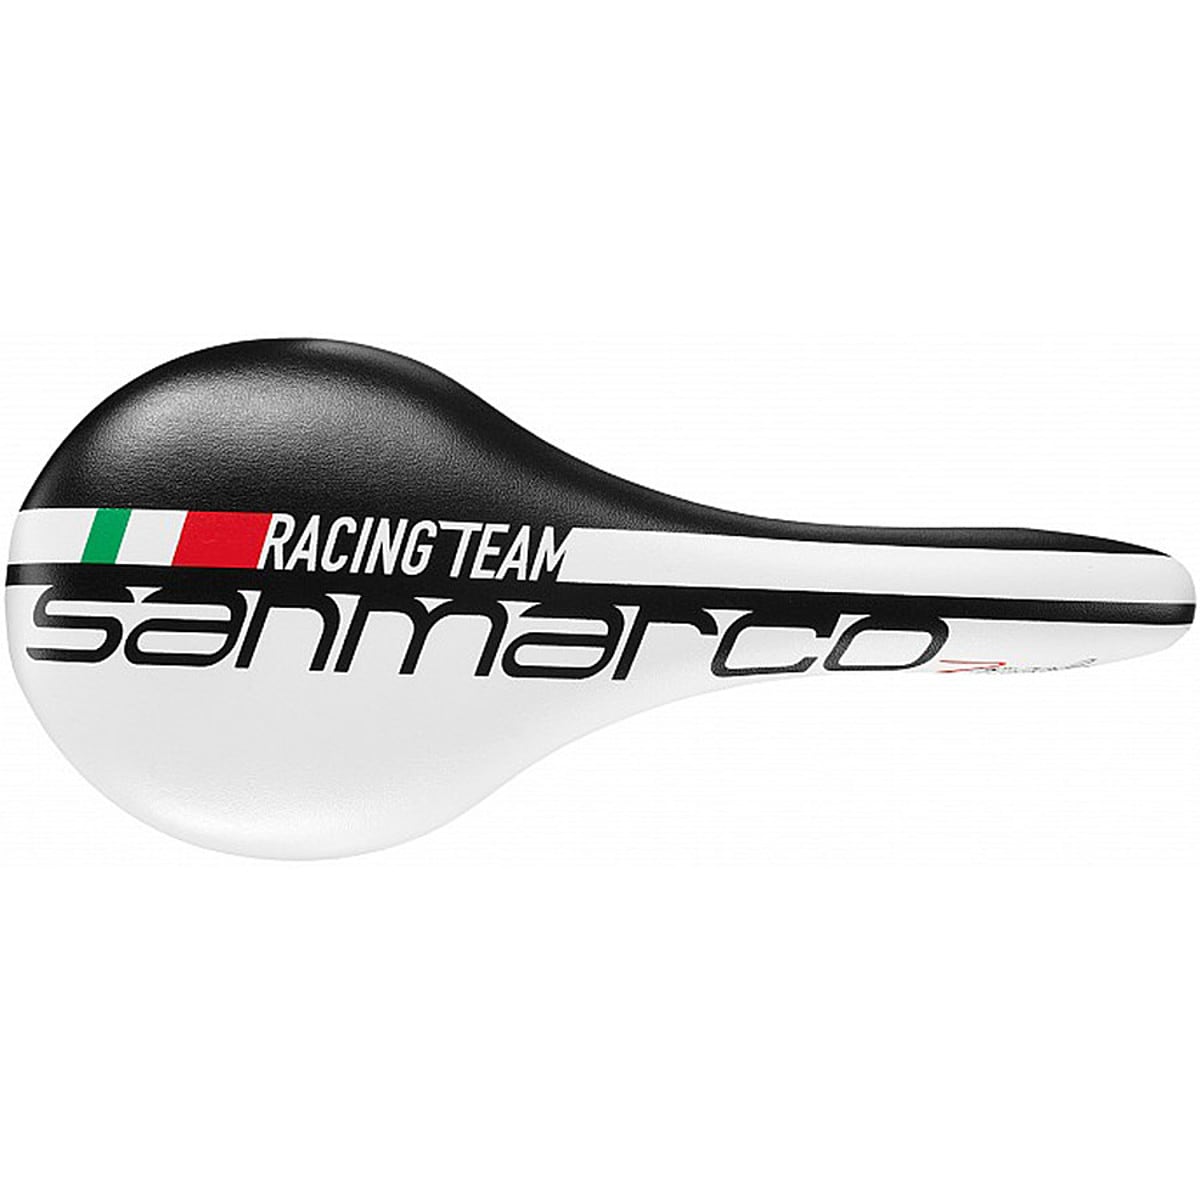 Selle San Marco Zoncolan Racing Team Saddle - Components